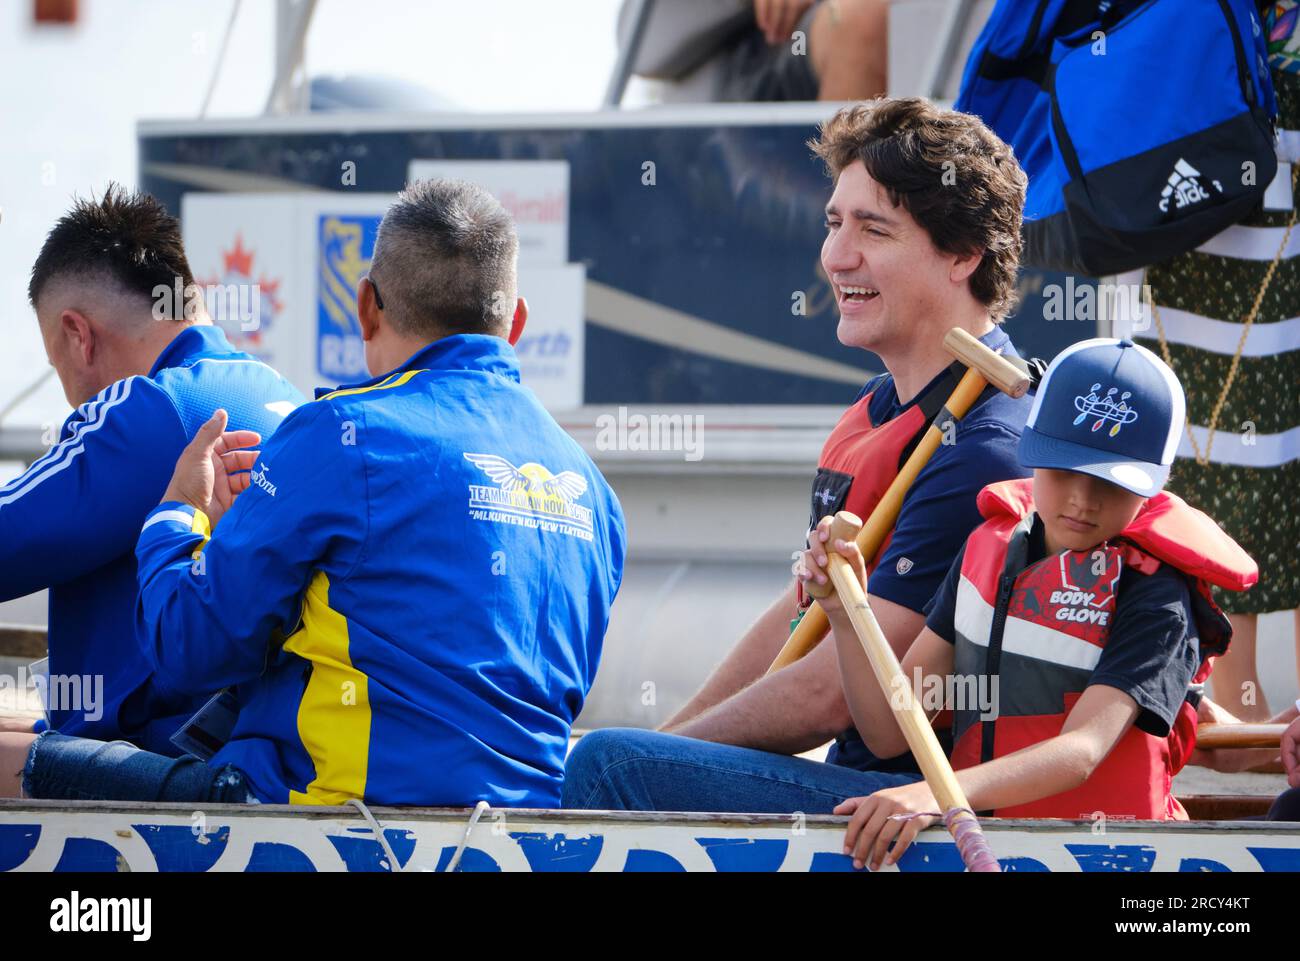 Dartmouth, Nova Scotia, Canada. July 17th, 2023. Canadian Prime Minister Justin Trudeau rides an Indigenous Canoe at the opening of the Canoe competition at the North American Indigenous Games. Credit: meanderingemu/Alamy Live News Stock Photo